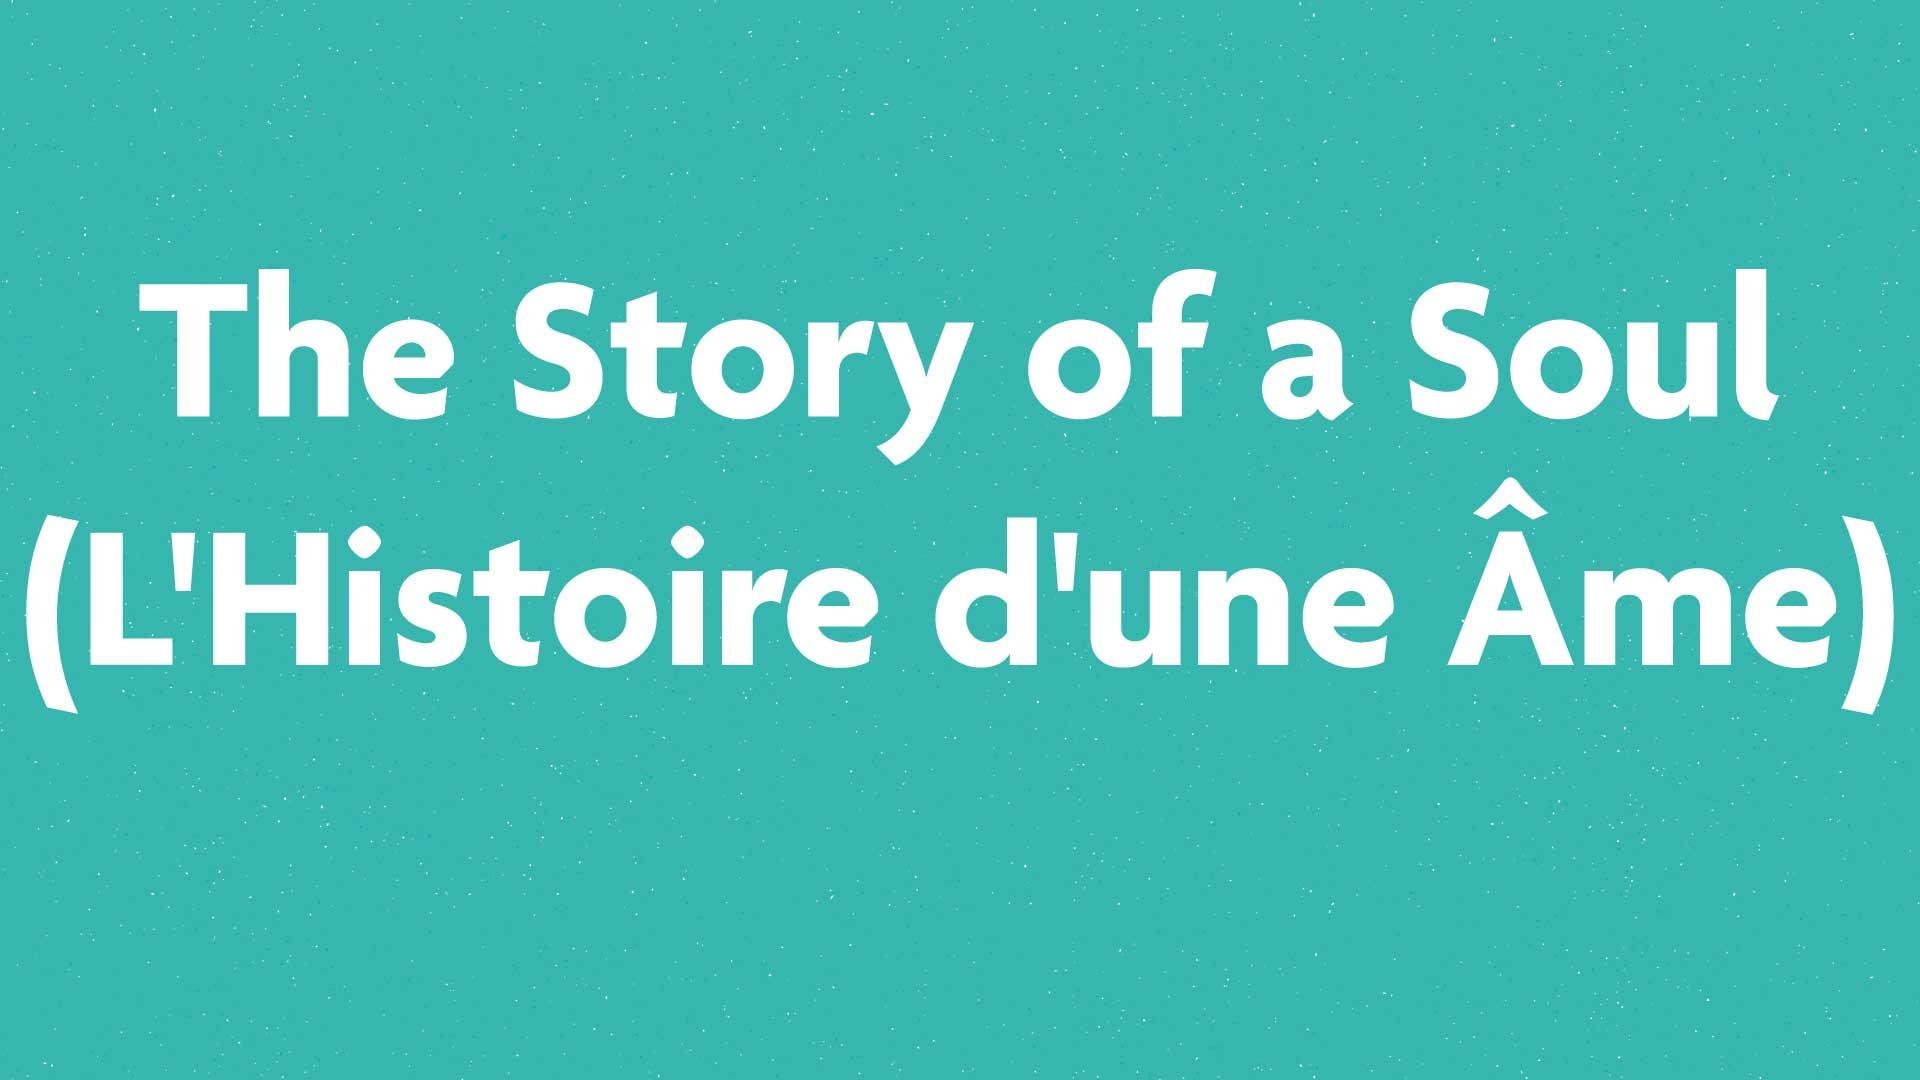 The Story of a Soul (L'Histoire d'une Âme) book submission card on a green background.